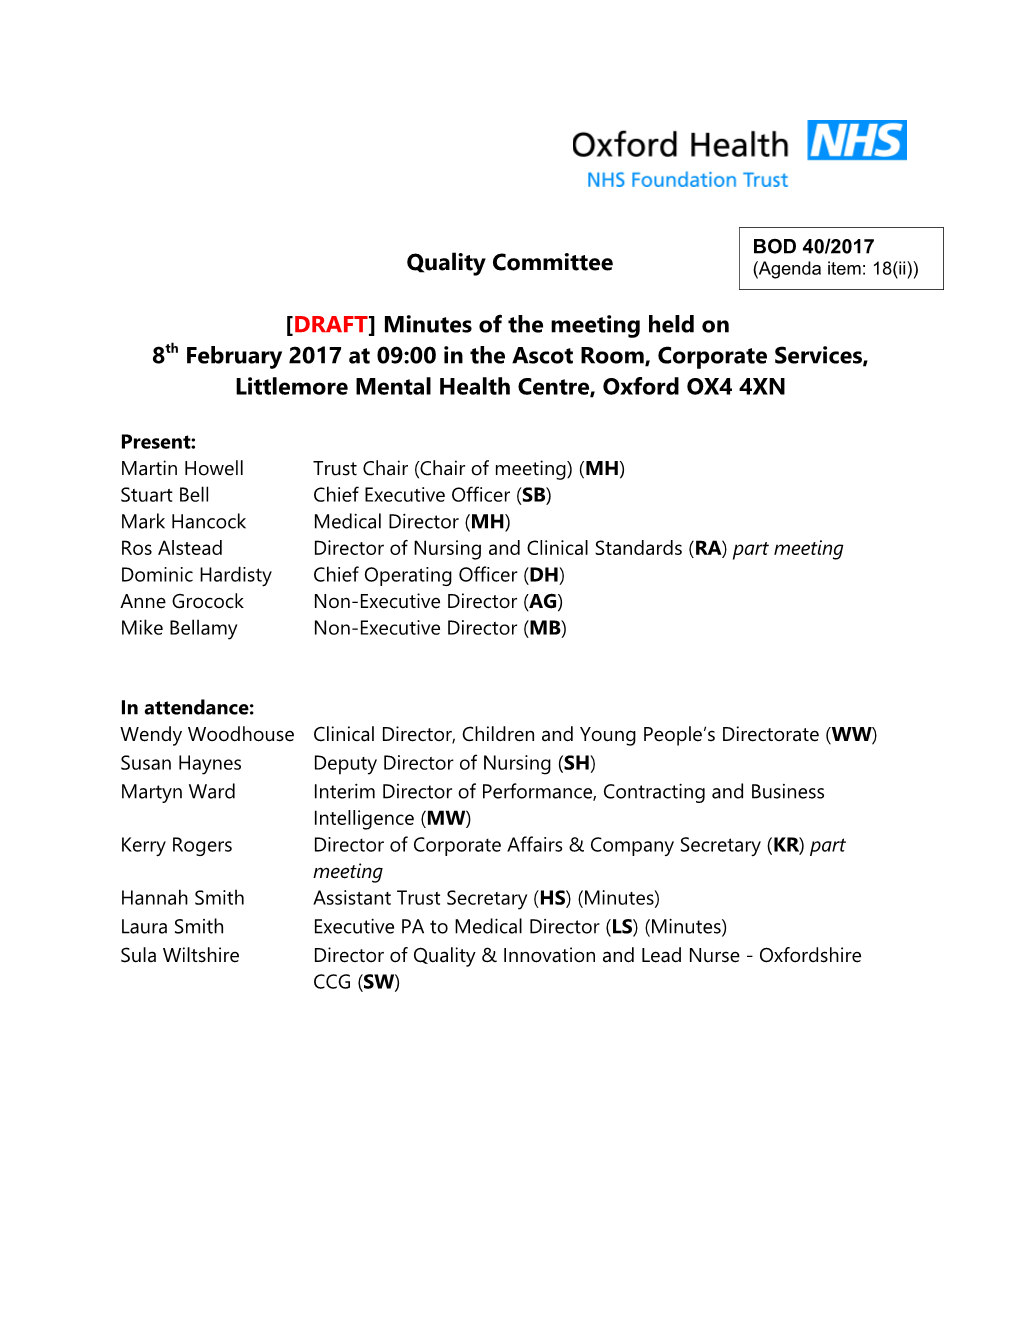 Minutes of the Quality Committee, 8Th February 2017